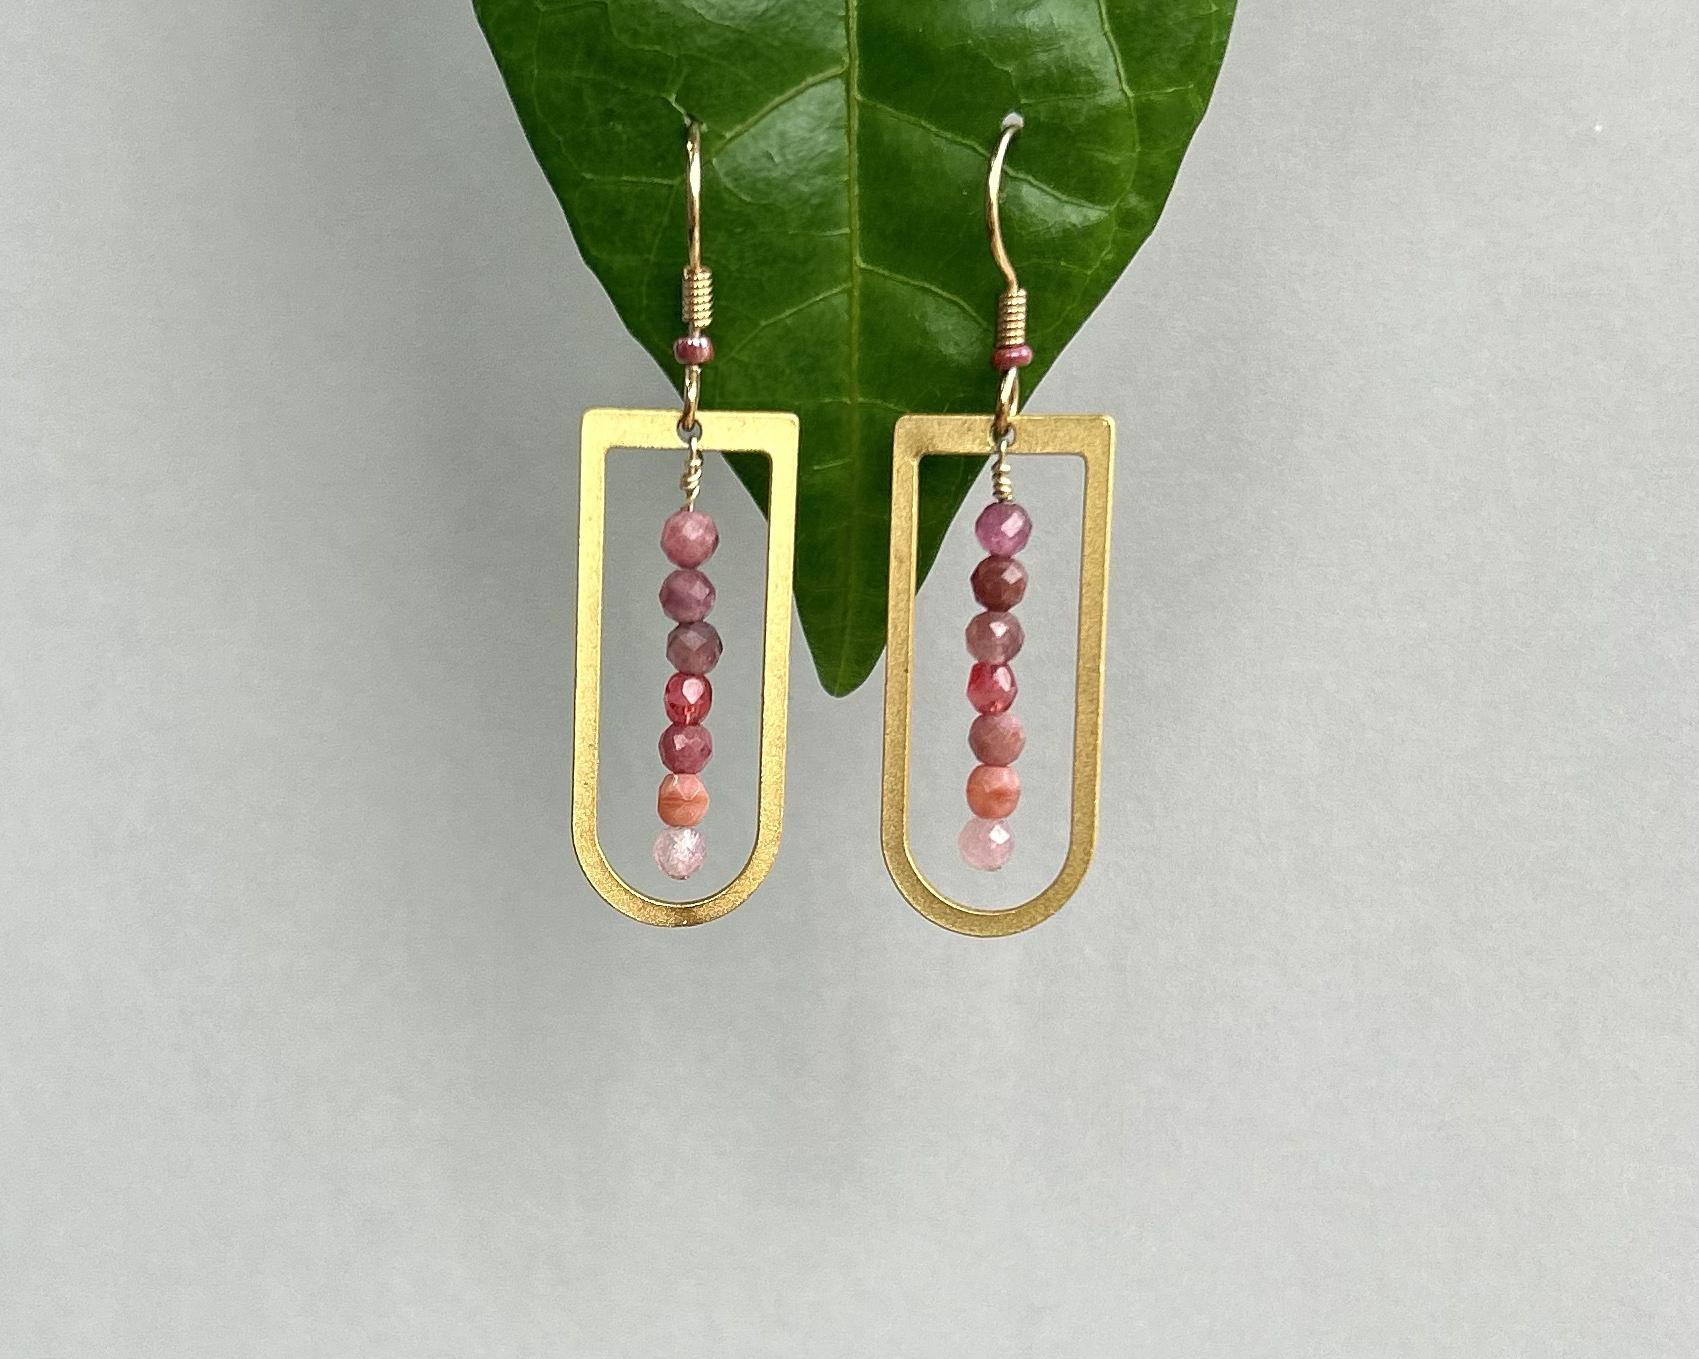 Shades of pink and gold dangle earrings